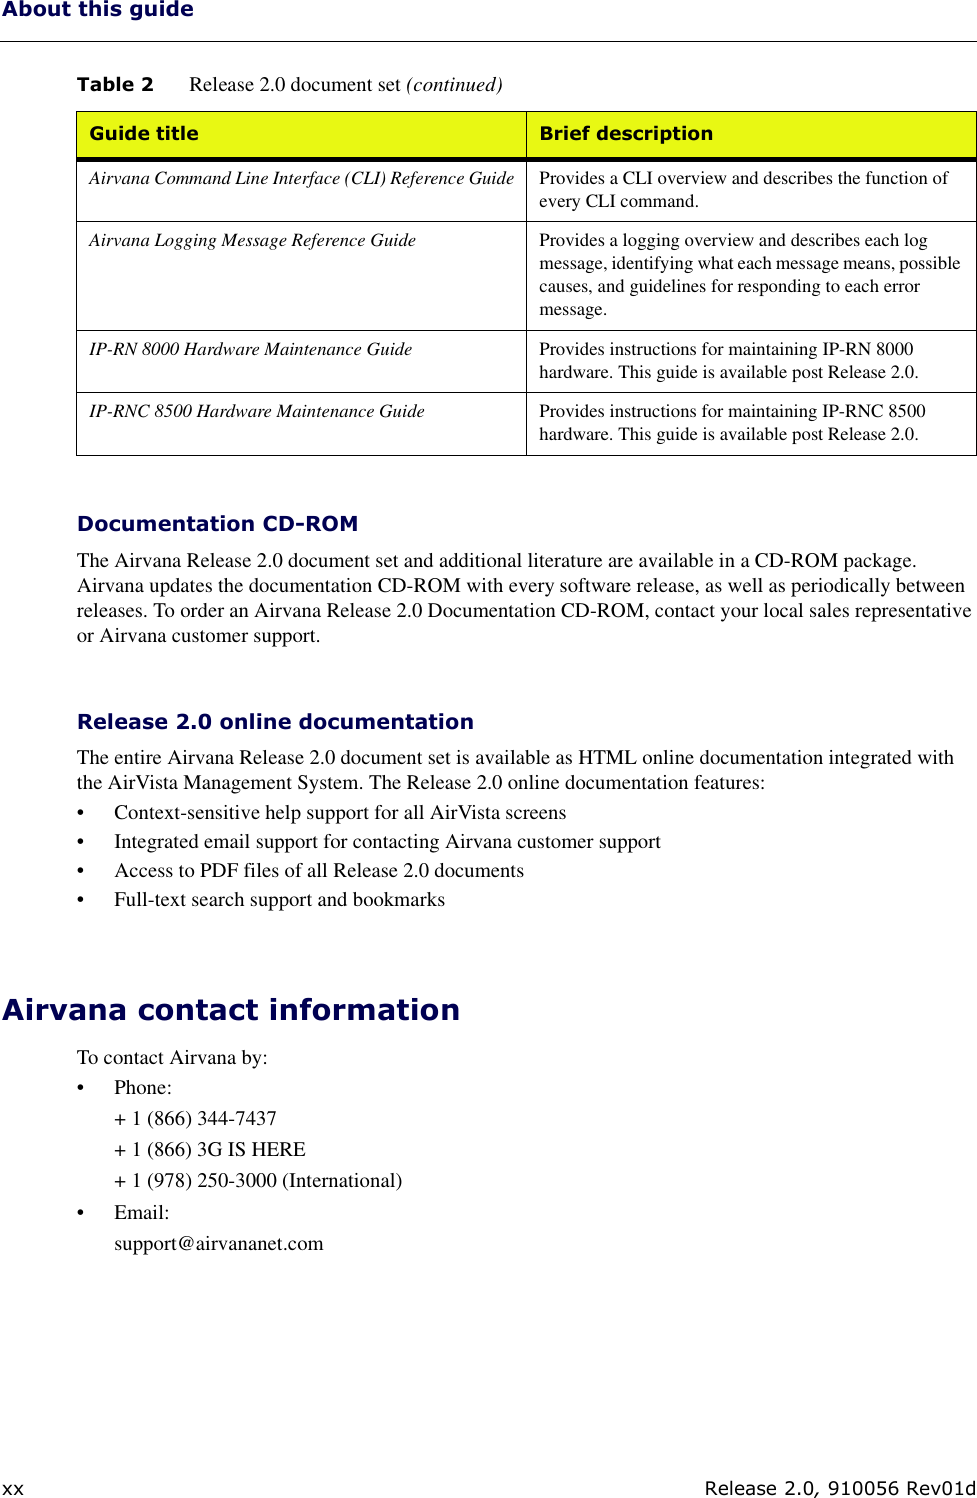 About this guidexx Release 2.0, 910056 Rev01dDocumentation CD-ROMThe Airvana Release 2.0 document set and additional literature are available in a CD-ROM package. Airvana updates the documentation CD-ROM with every software release, as well as periodically between releases. To order an Airvana Release 2.0 Documentation CD-ROM, contact your local sales representative or Airvana customer support.Release 2.0 online documentationThe entire Airvana Release 2.0 document set is available as HTML online documentation integrated with the AirVista Management System. The Release 2.0 online documentation features:• Context-sensitive help support for all AirVista screens• Integrated email support for contacting Airvana customer support• Access to PDF files of all Release 2.0 documents• Full-text search support and bookmarksAirvana contact informationTo contact Airvana by:• Phone:+ 1 (866) 344-7437+ 1 (866) 3G IS HERE+ 1 (978) 250-3000 (International)• Email: support@airvananet.comAirvana Command Line Interface (CLI) Reference Guide Provides a CLI overview and describes the function of every CLI command.Airvana Logging Message Reference Guide Provides a logging overview and describes each log message, identifying what each message means, possible causes, and guidelines for responding to each error message.IP-RN 8000 Hardware Maintenance Guide Provides instructions for maintaining IP-RN 8000 hardware. This guide is available post Release 2.0.IP-RNC 8500 Hardware Maintenance Guide Provides instructions for maintaining IP-RNC 8500 hardware. This guide is available post Release 2.0.Table 2 Release 2.0 document set (continued)Guide title Brief description